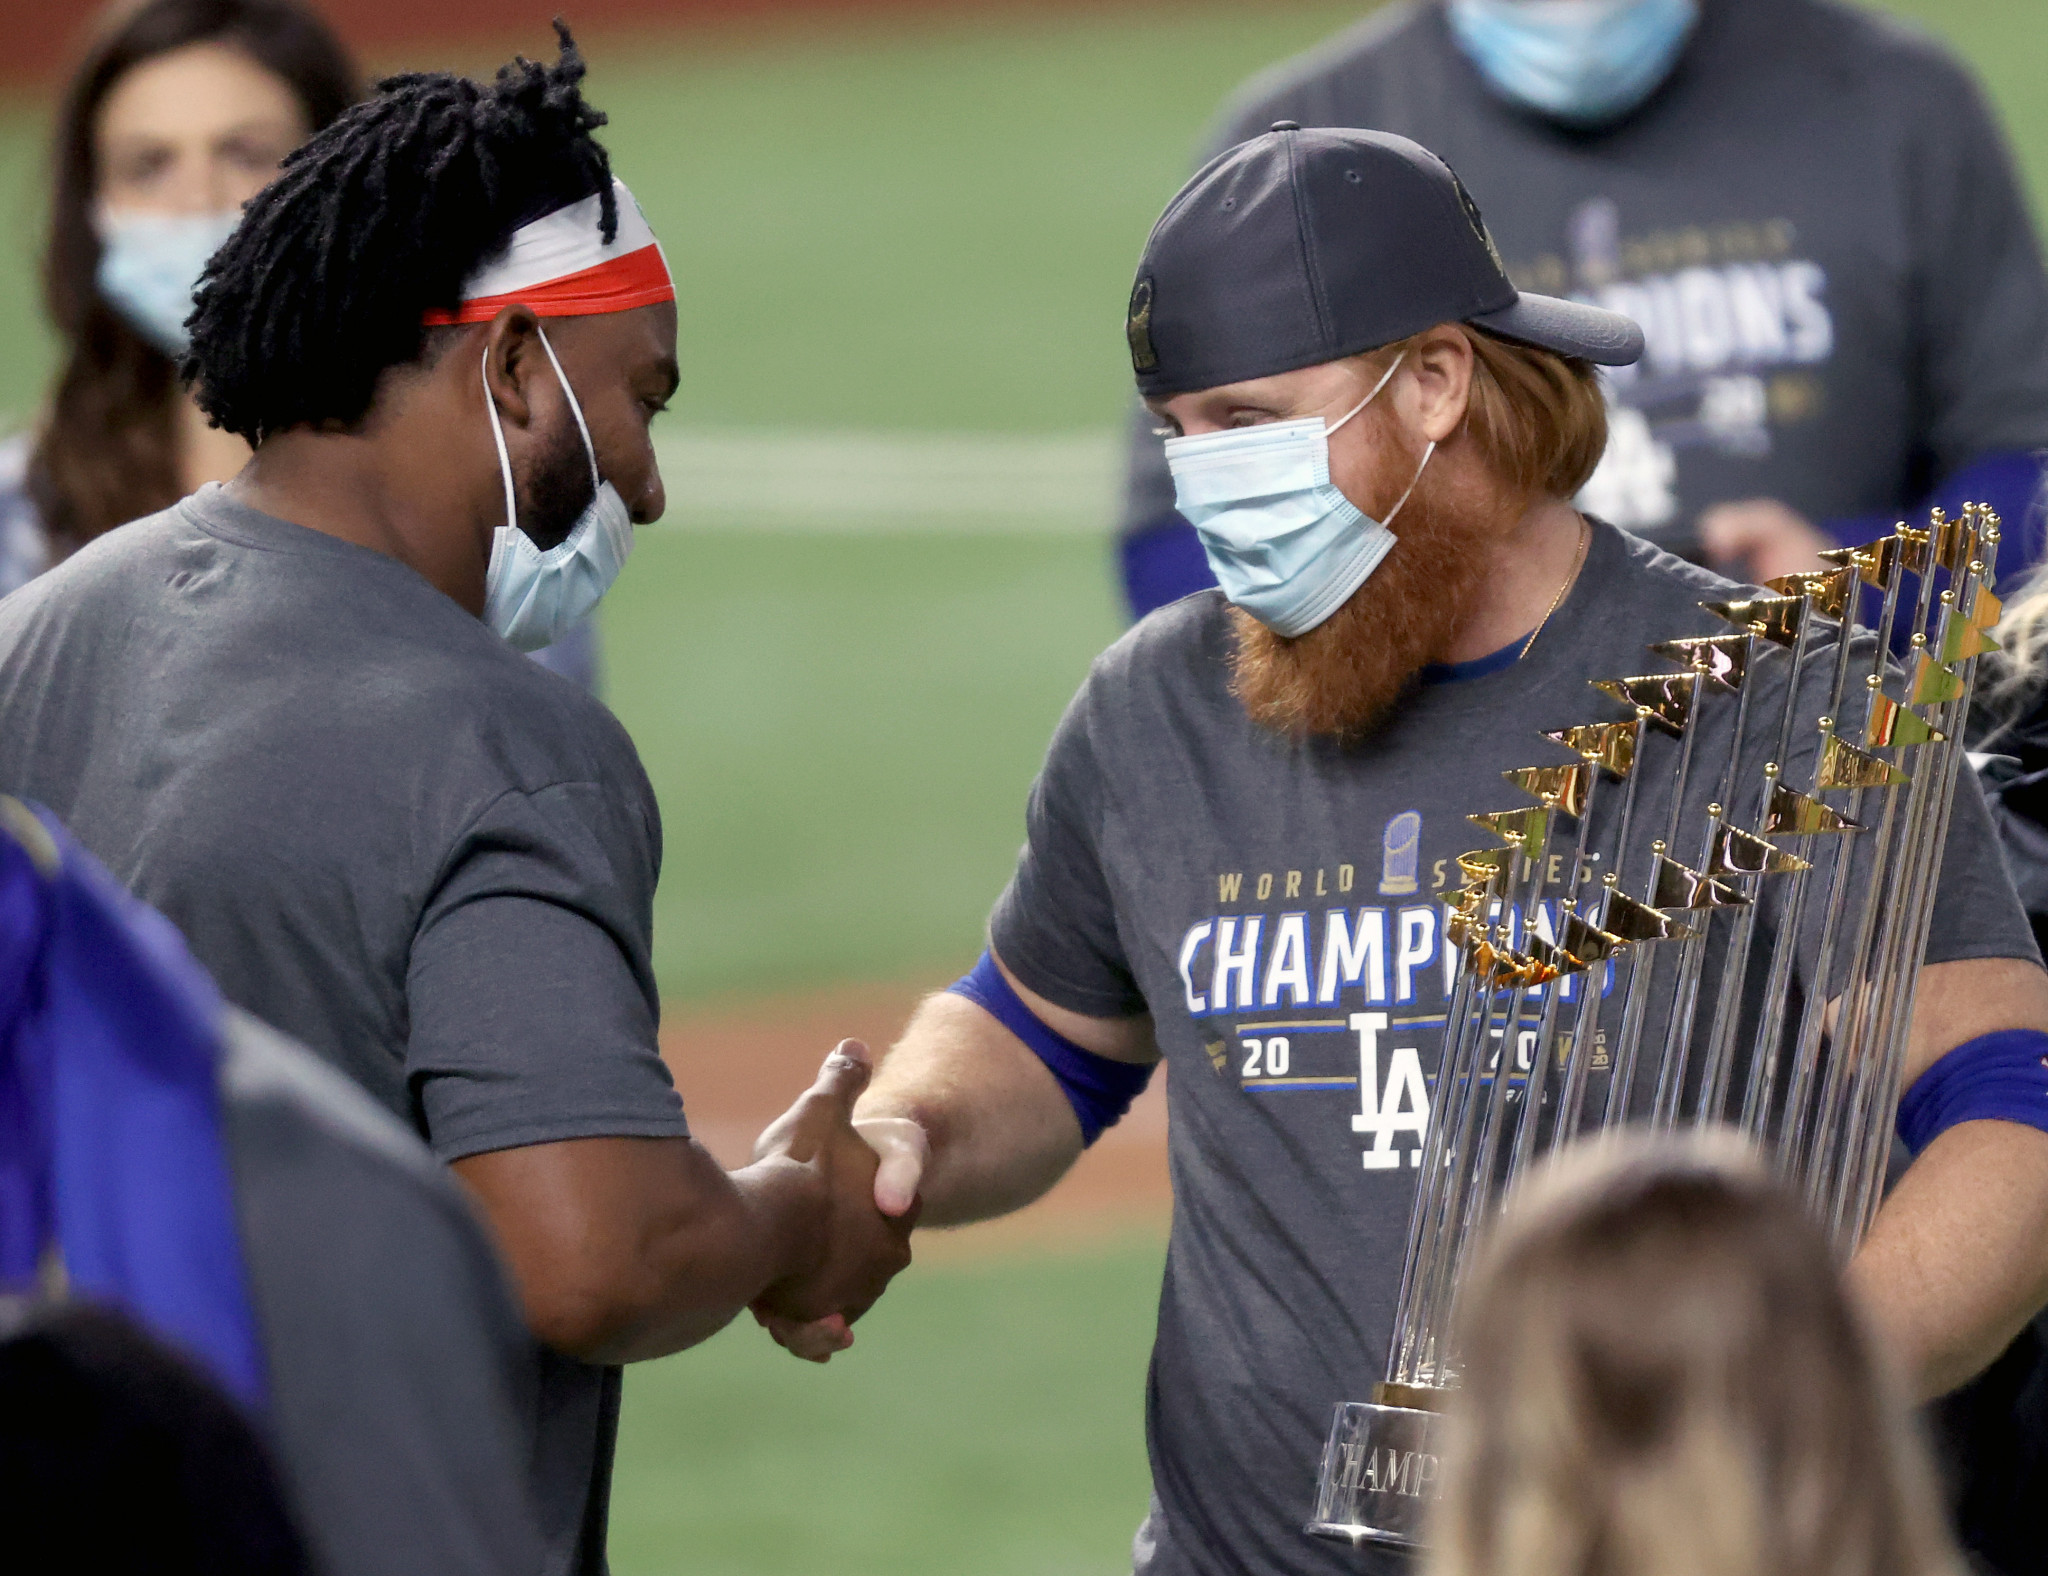 Justin Turner, right, shakes hands with a colleague despite knowing he has coronavirus ©Getty Images